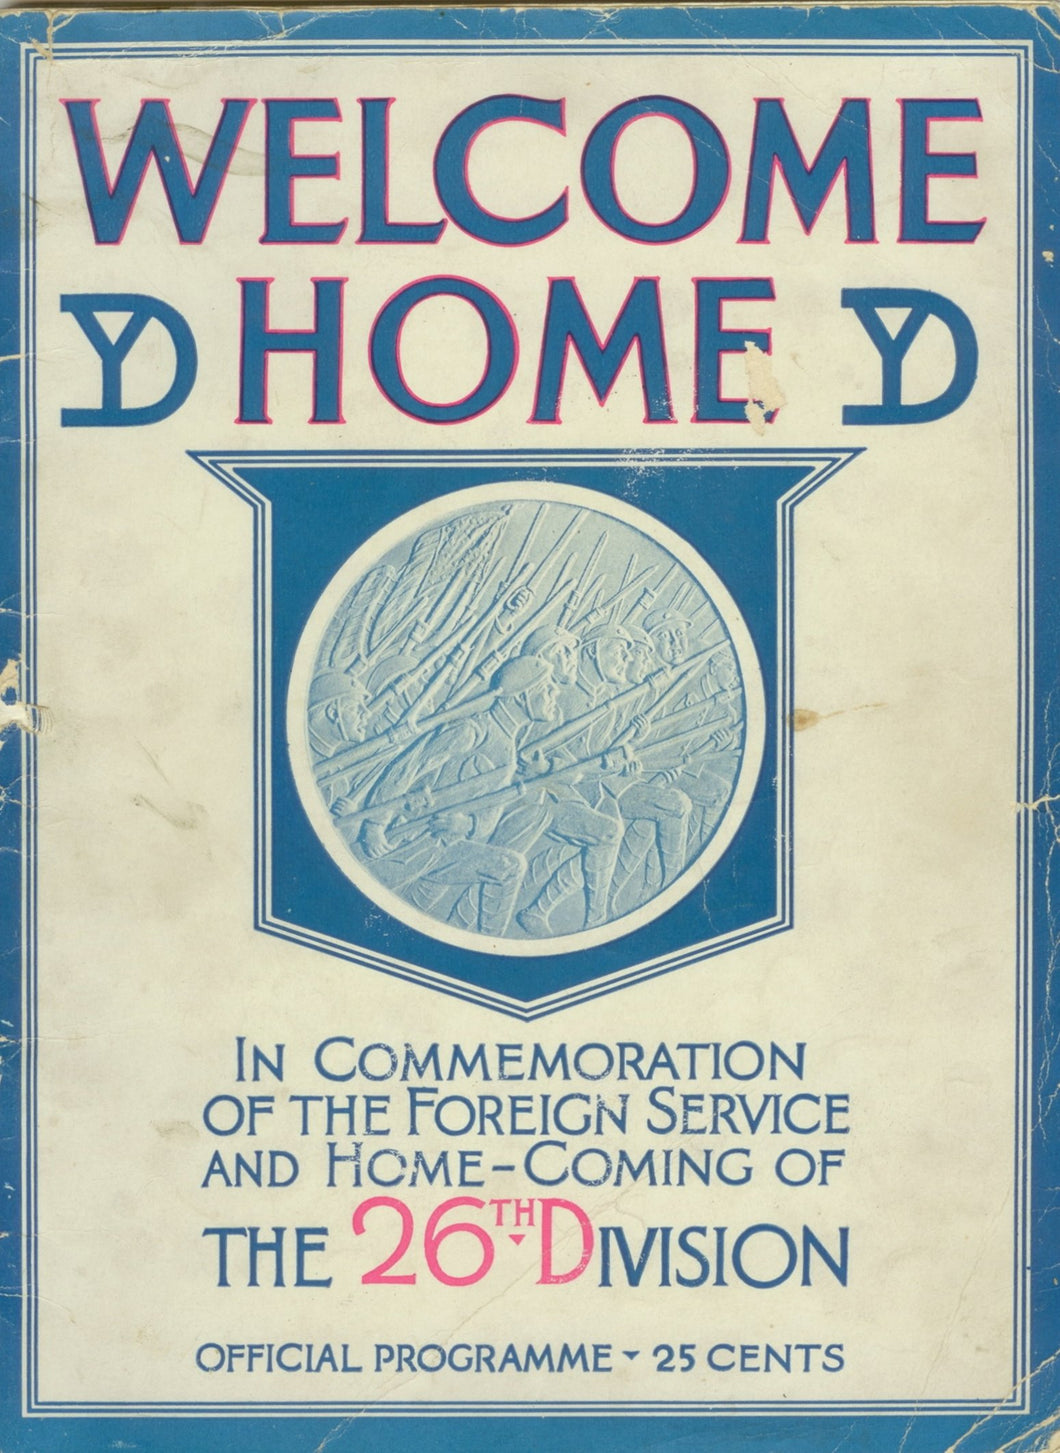 Welcome Home: In Commemoration of the Foreign Service and Home-Coming of the 26th Division. Official Programme - 25 Cents